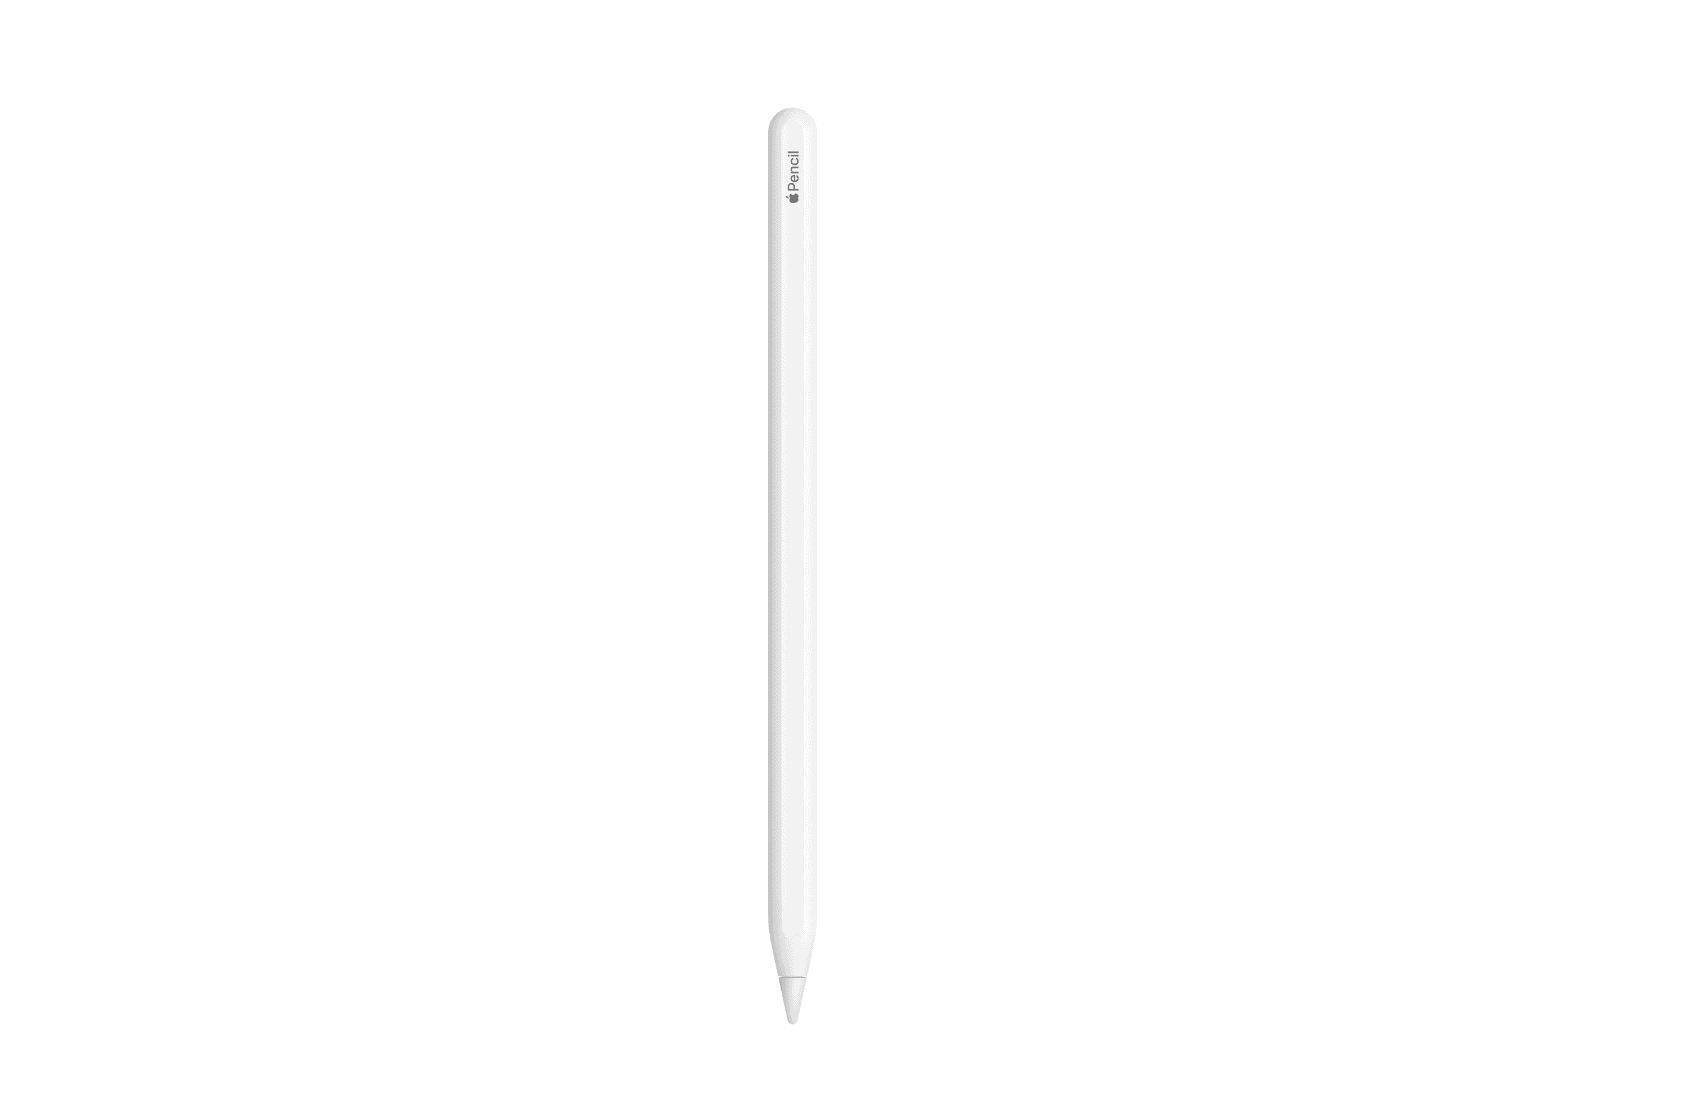 The 2nd Generation Apple Pencil